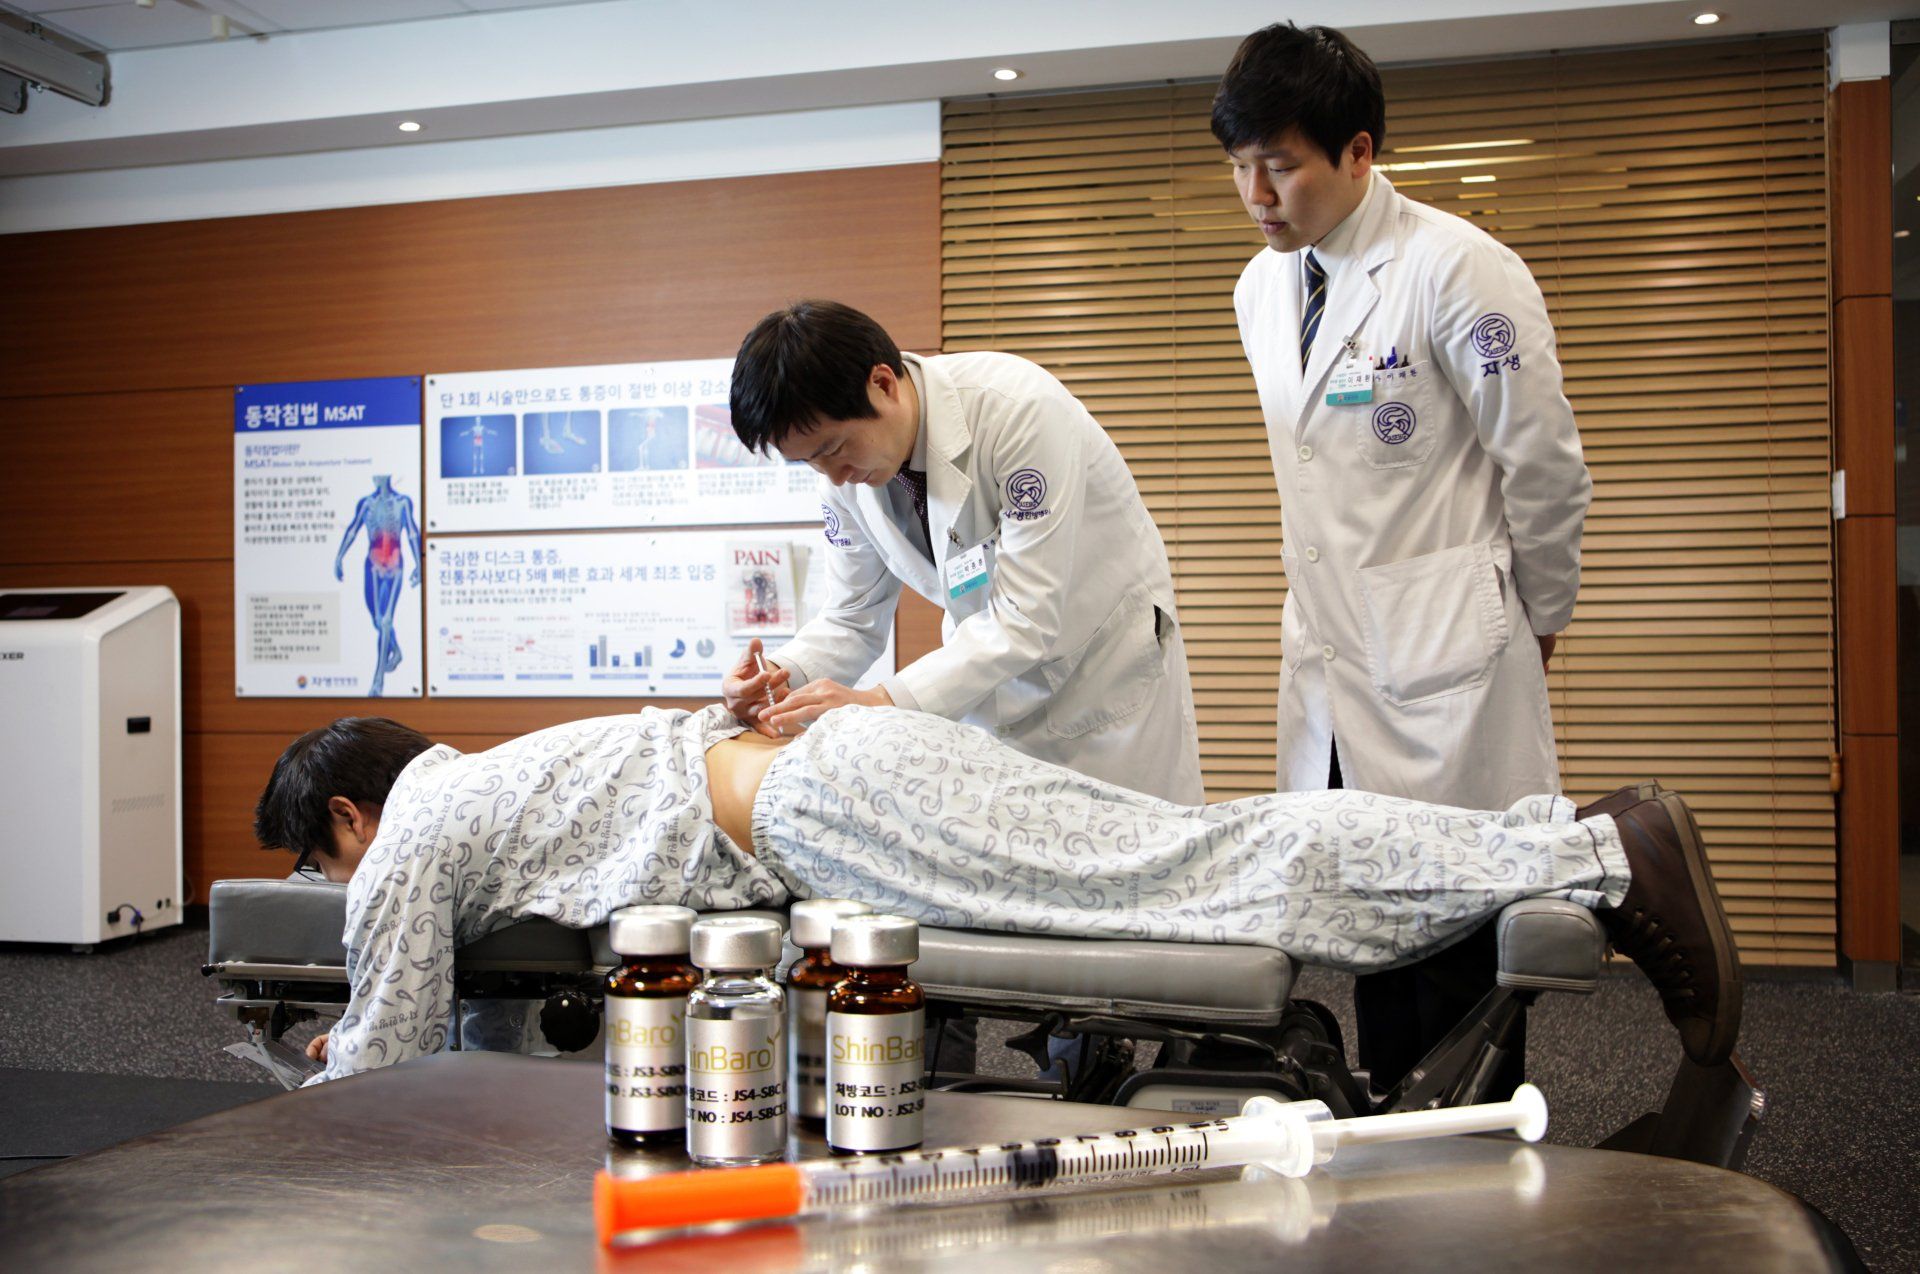 
Most patients non-surgically treated for their spinal conditions: The Jaseng Hospital of Korean Medicine sets world record